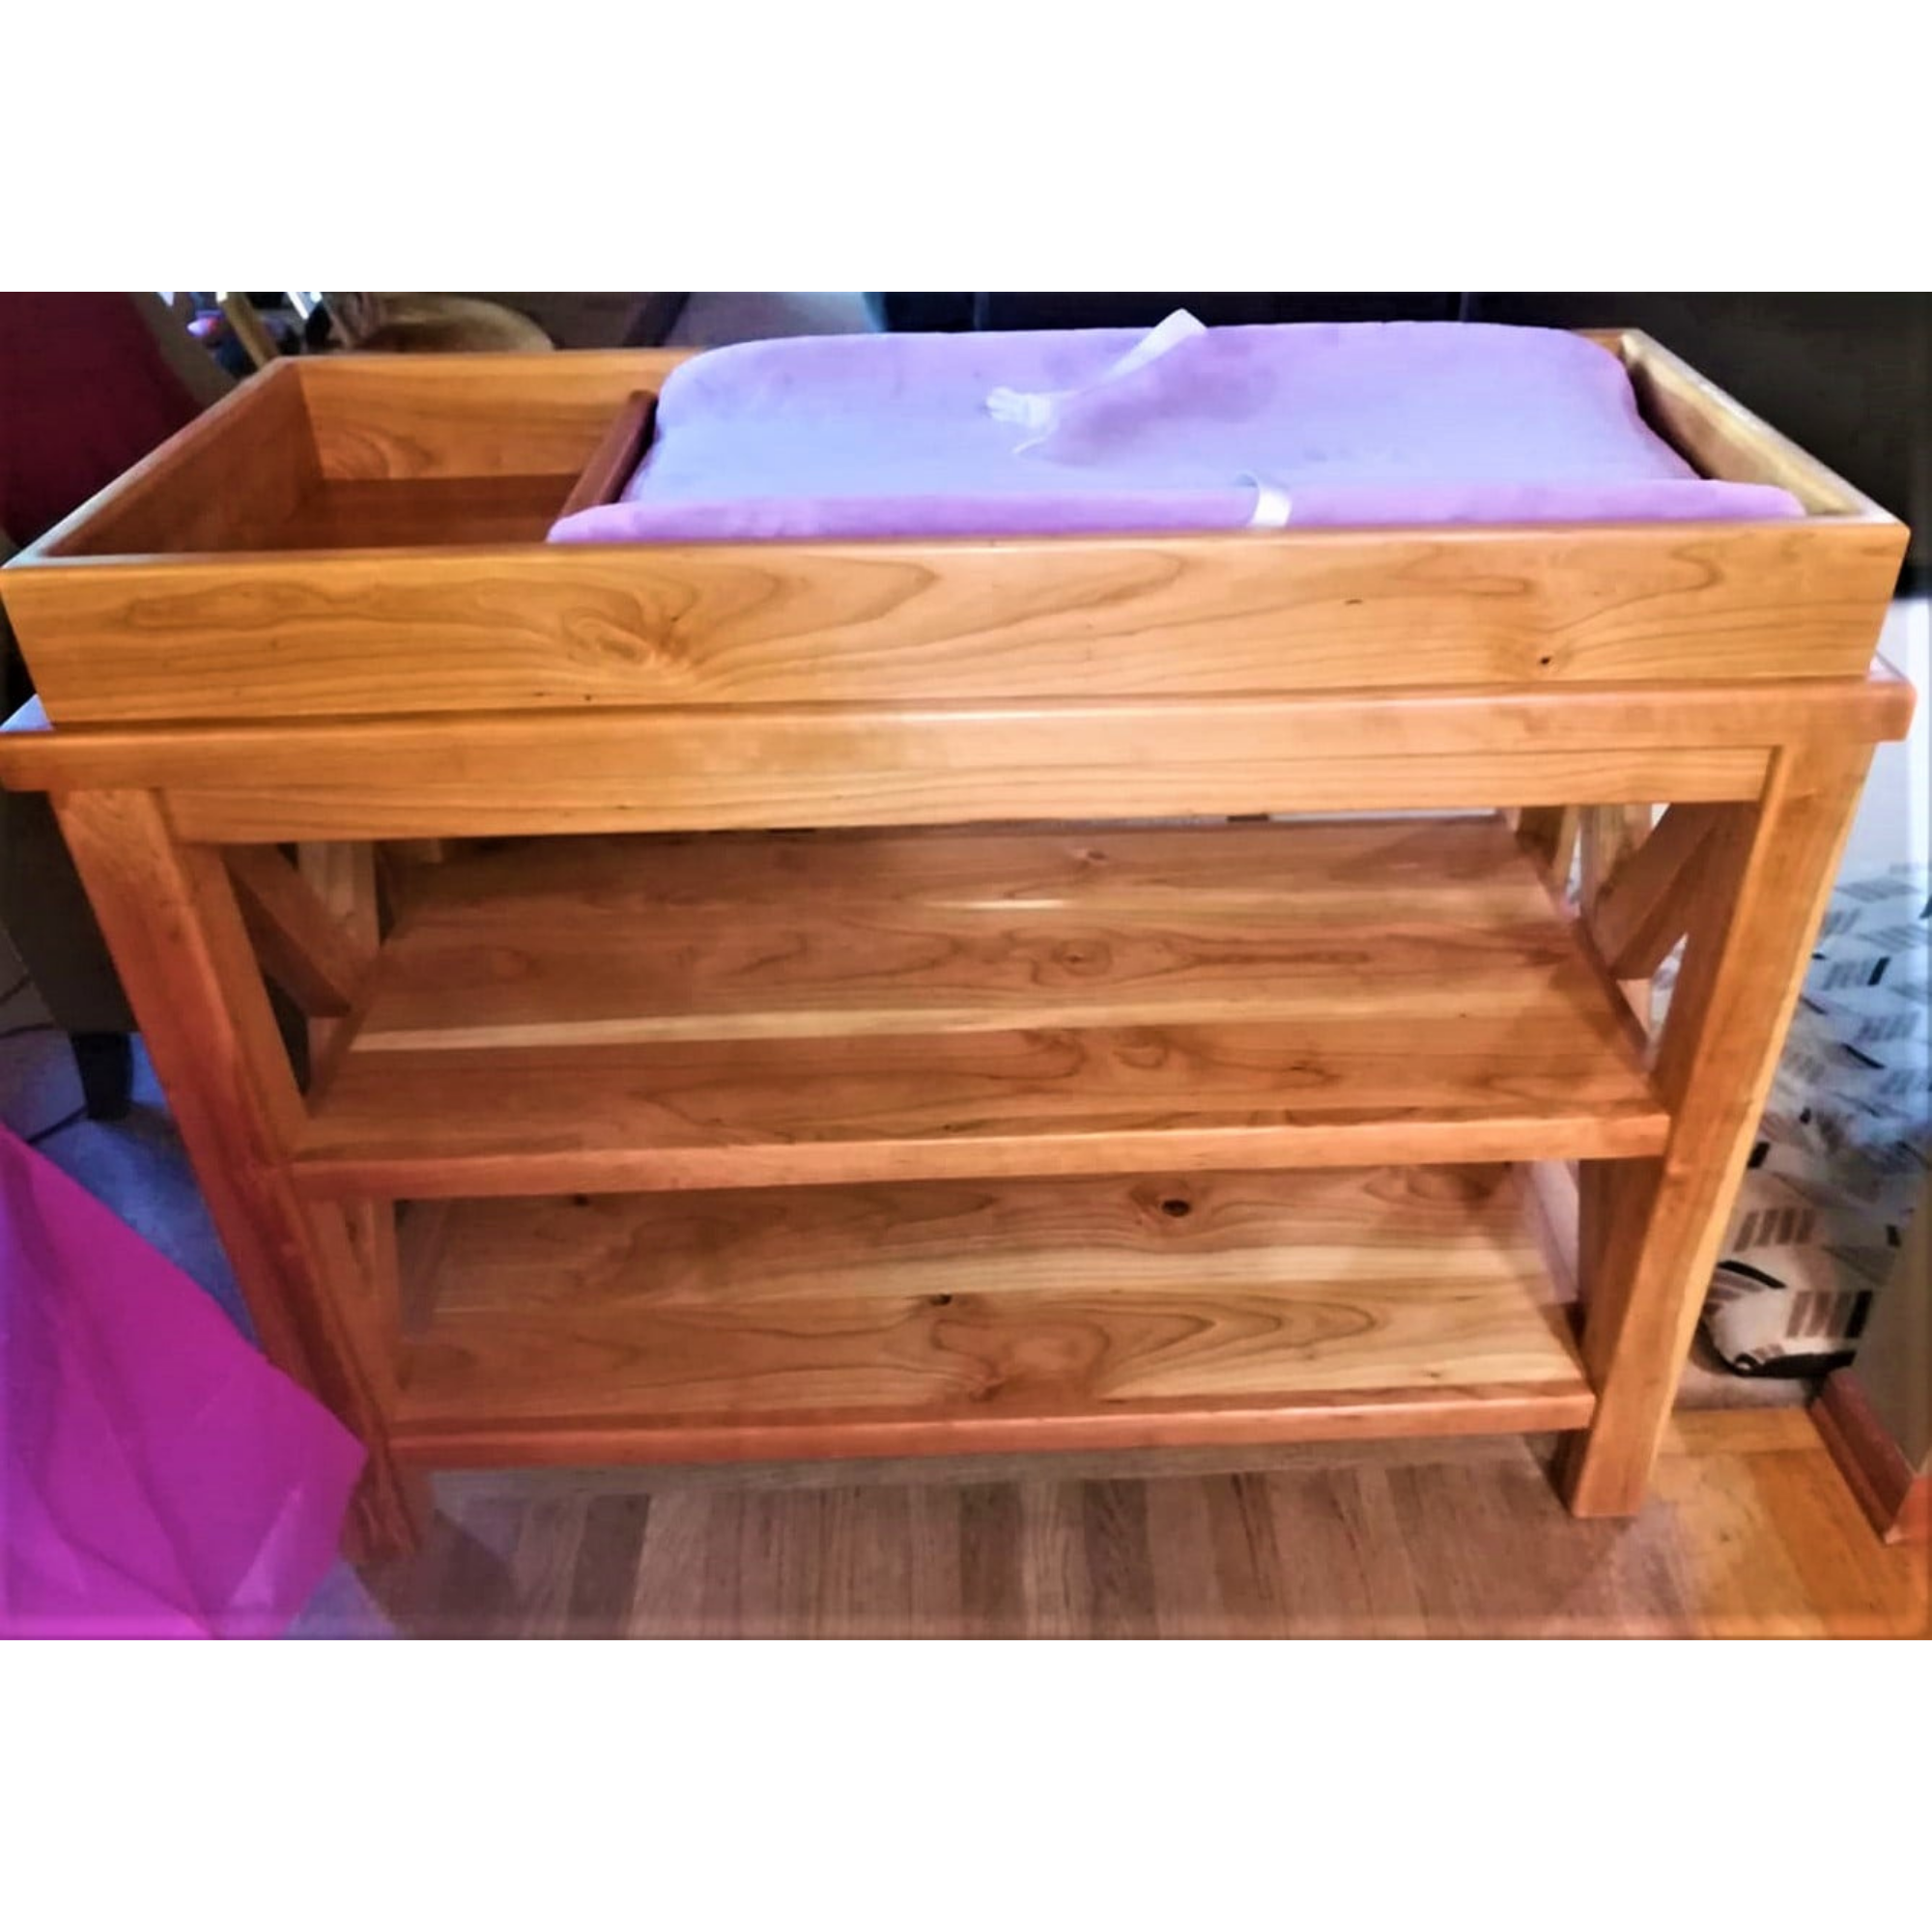 SOLD - AVAILABLE AS CUSTOM ORDER ONLY - Cherry Wood Changing Table